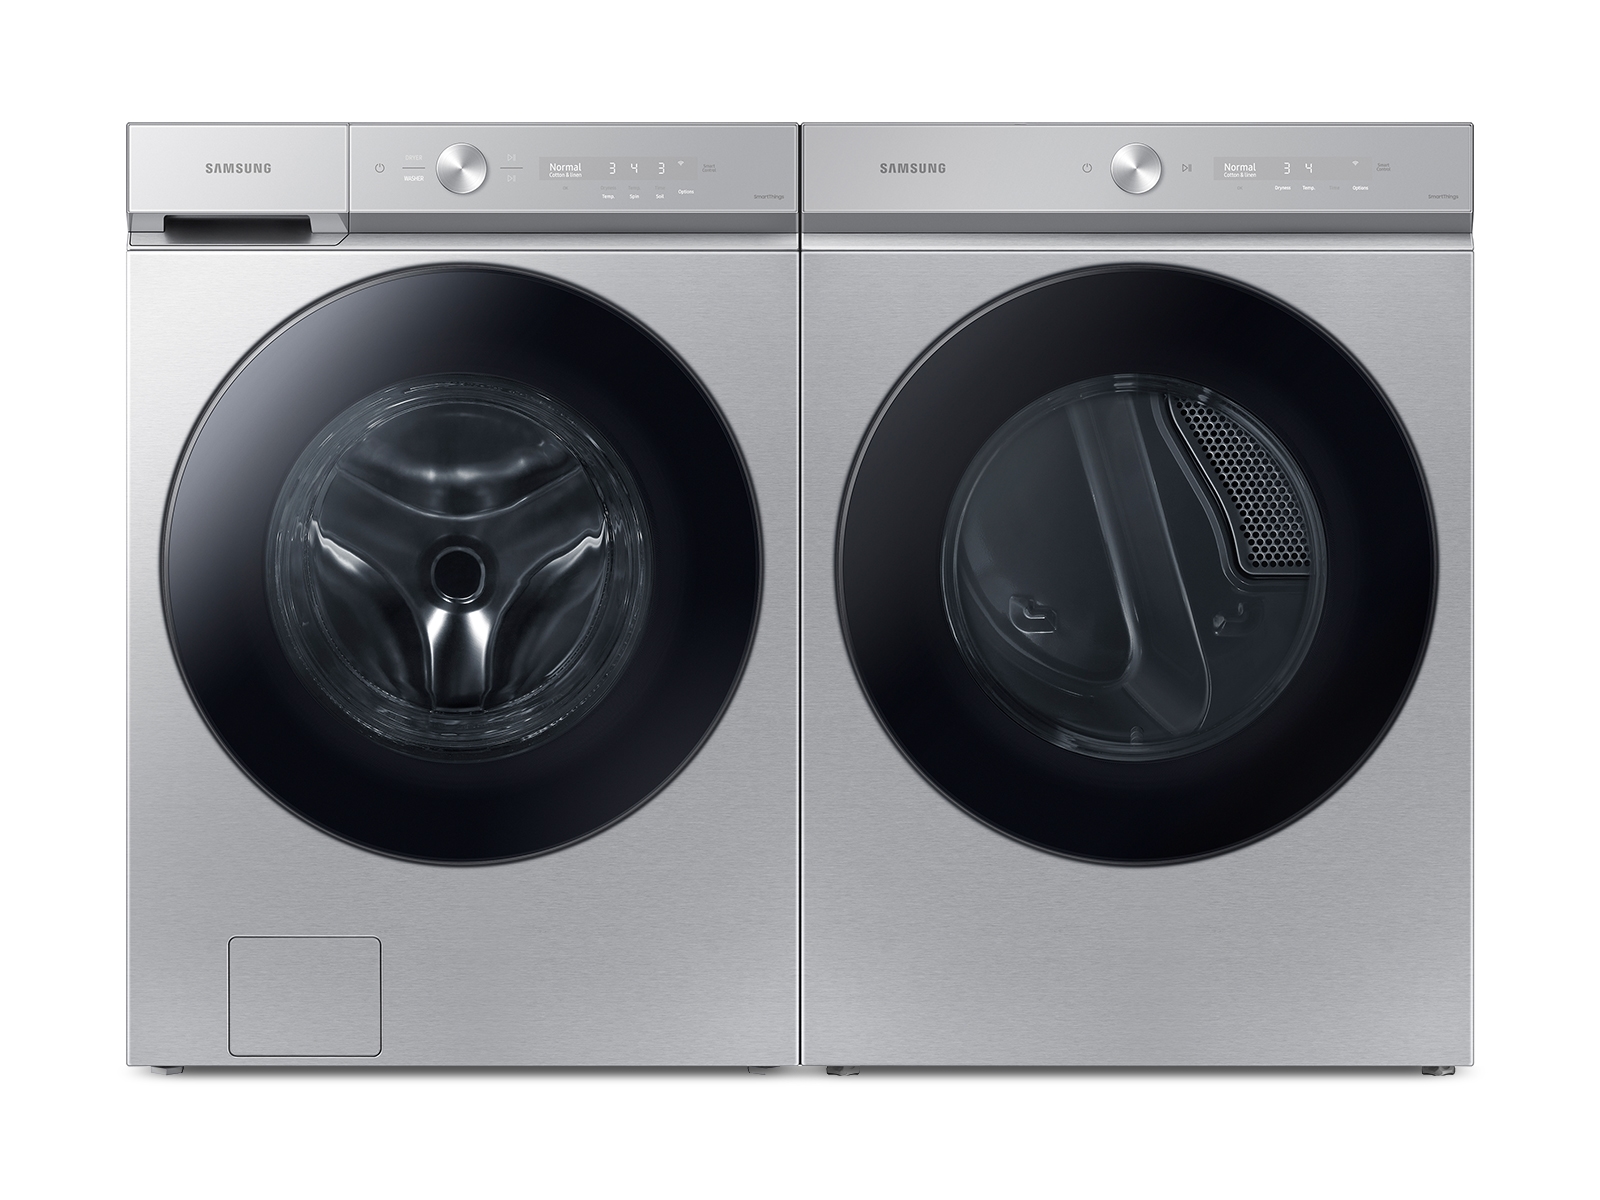 Photos - Tumble Dryer Samsung Bespoke Ultra Capacity Front Load Washer and Electric Dryer in Sil 